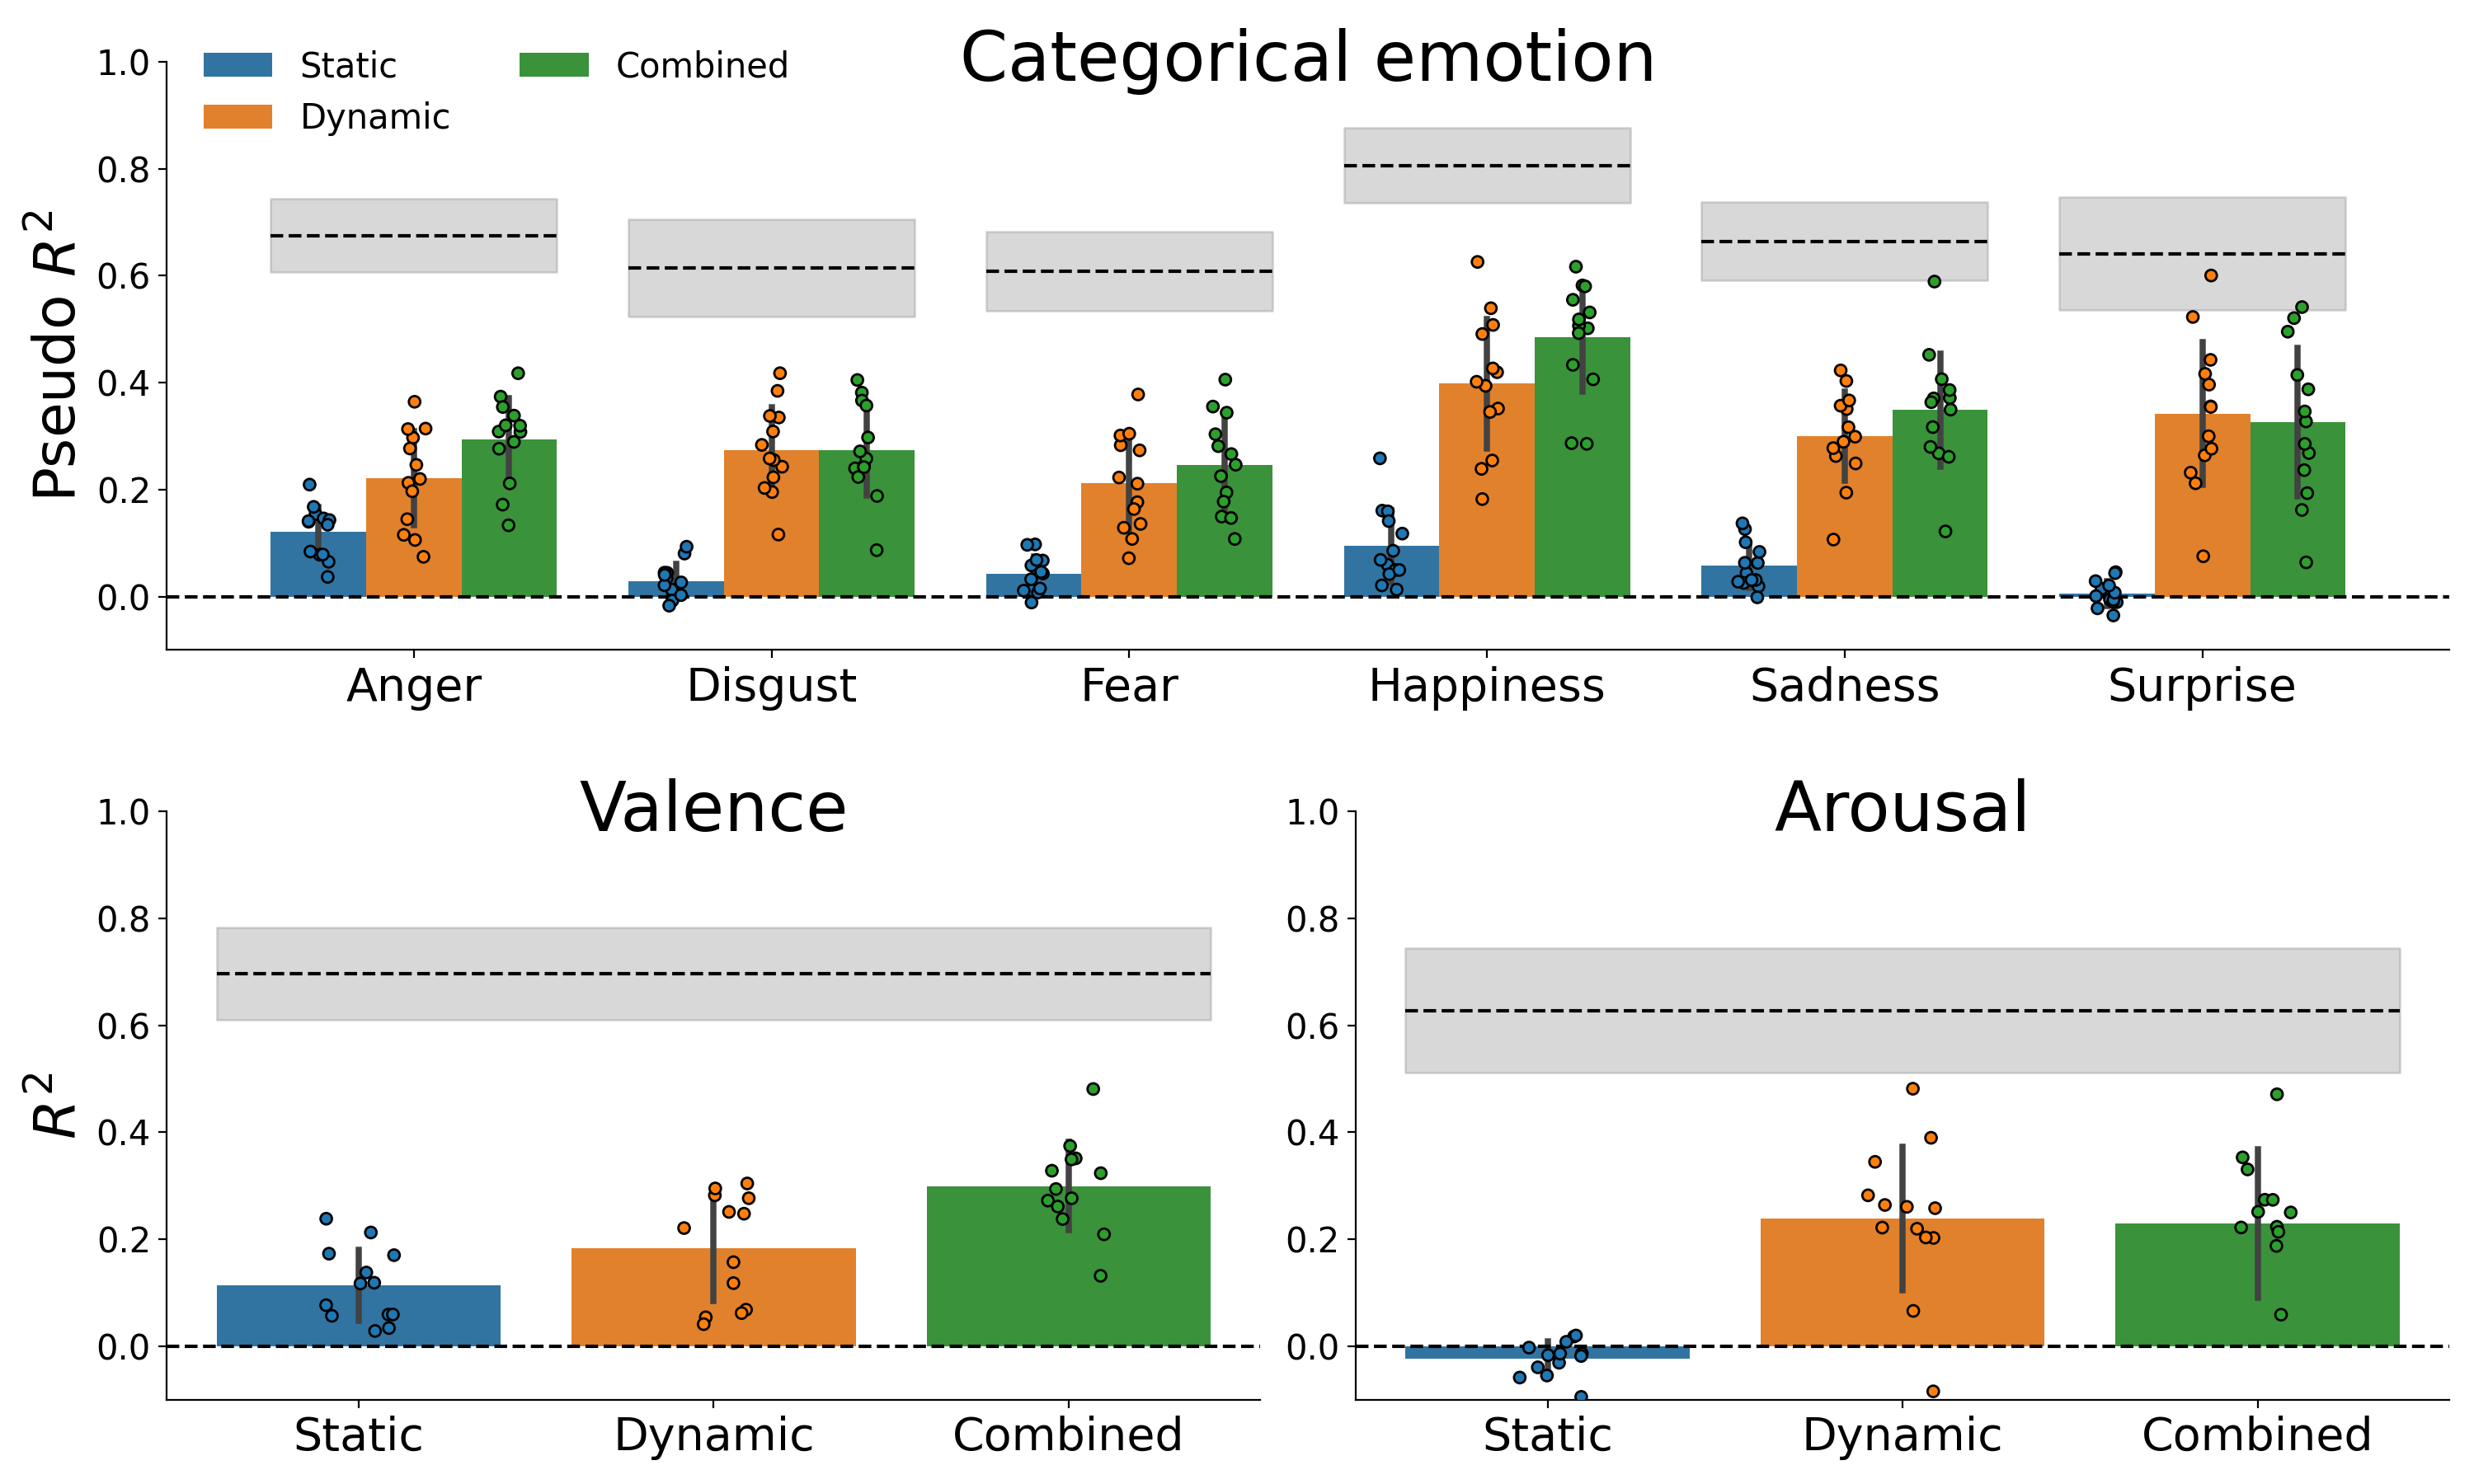 Cross-validated model performance, shown separately for each target feature (top: categorical emotion, bottom left: valence, bottom right: arousal) and feature set (static, dynamic, and combined). The bar height represents the mean model performance across participants and the error bars represent ±1 SD. The average within-participant noise ceiling of the combined feature set is plotted for reference as a dashed black line, which is surrounded by a grey area indicating ±1 SD.